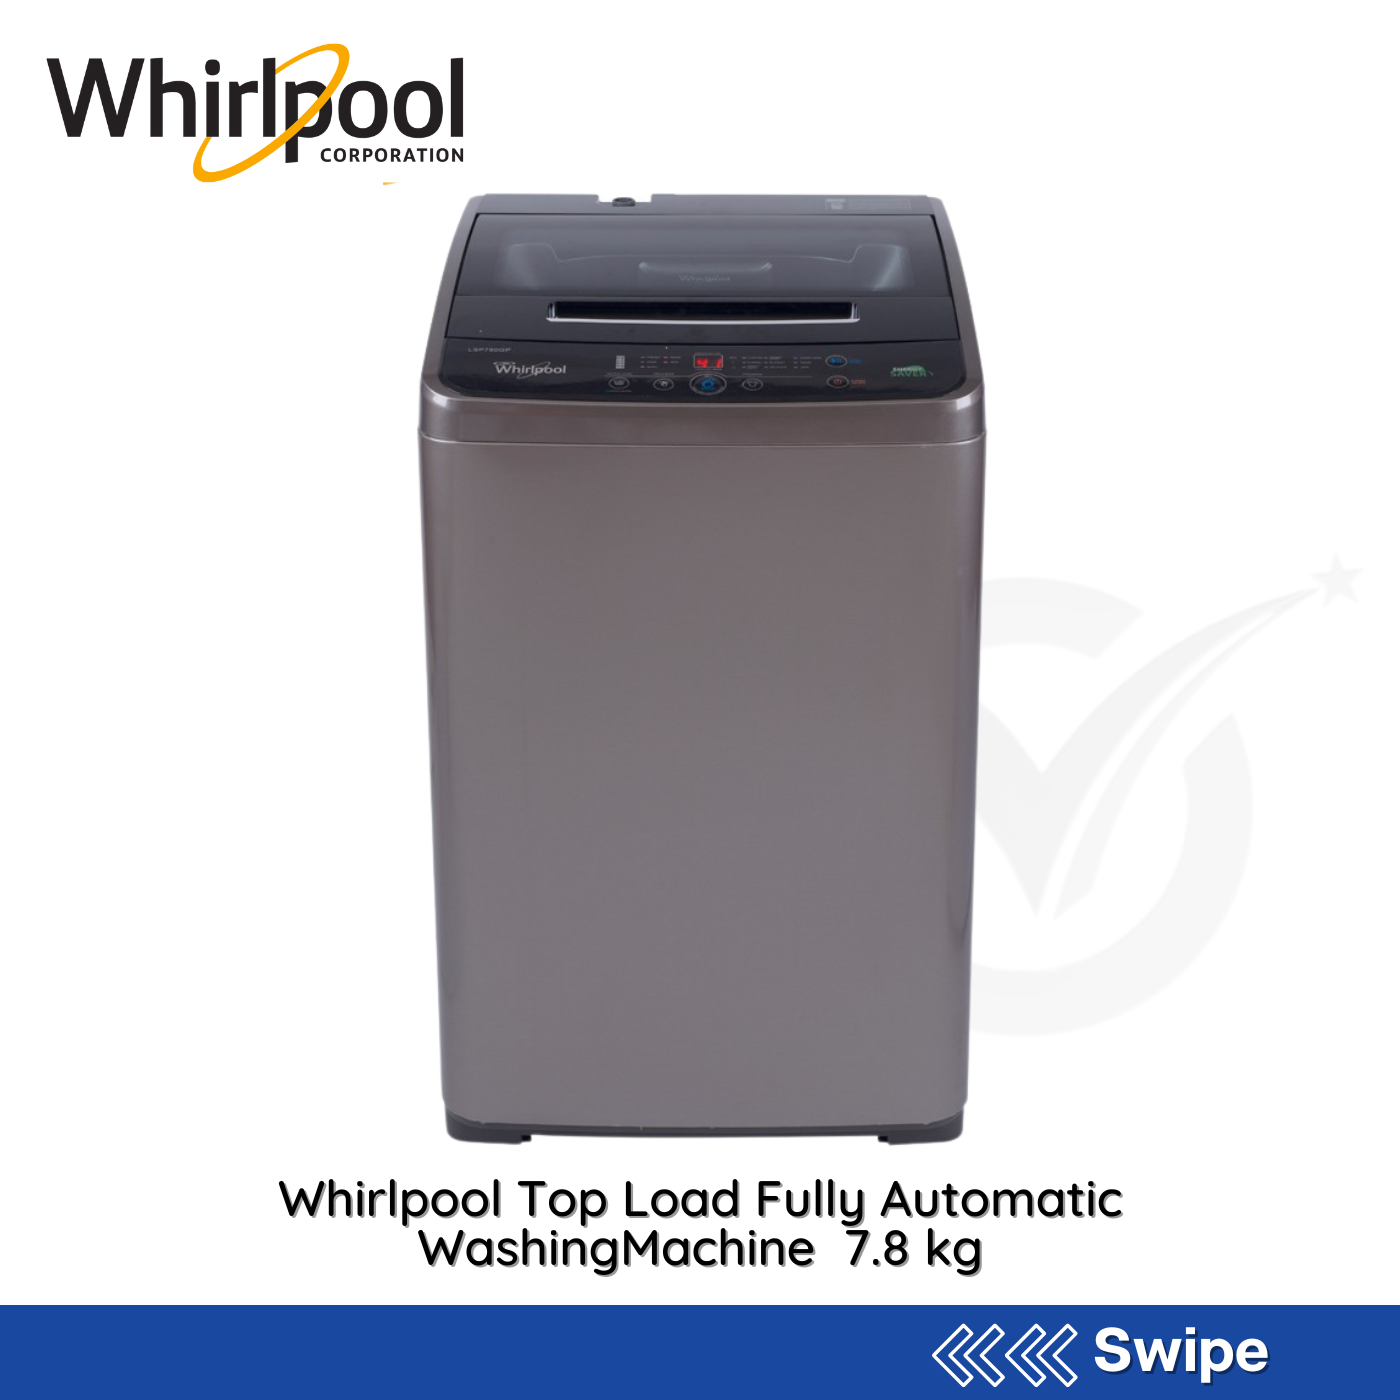 Whirlpool Top Load Fully Automatic WashingMachine  7.8 kg